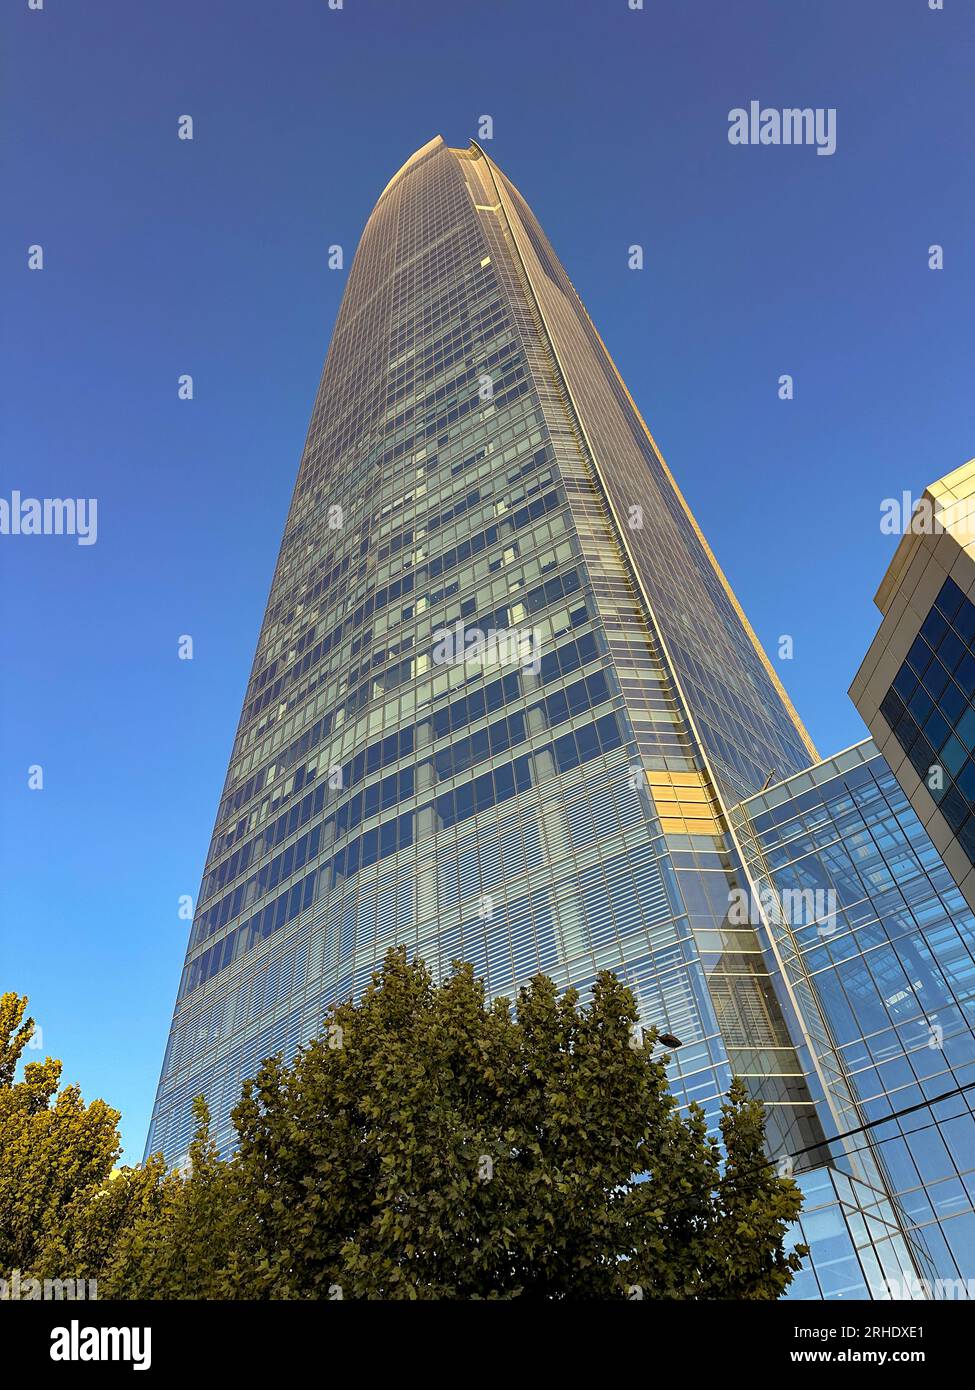 The 62-story Gran Torre Santiago, tallest building in South America, in the Costanera Center.  Providencia, Santiago, Chile. Stock Photo